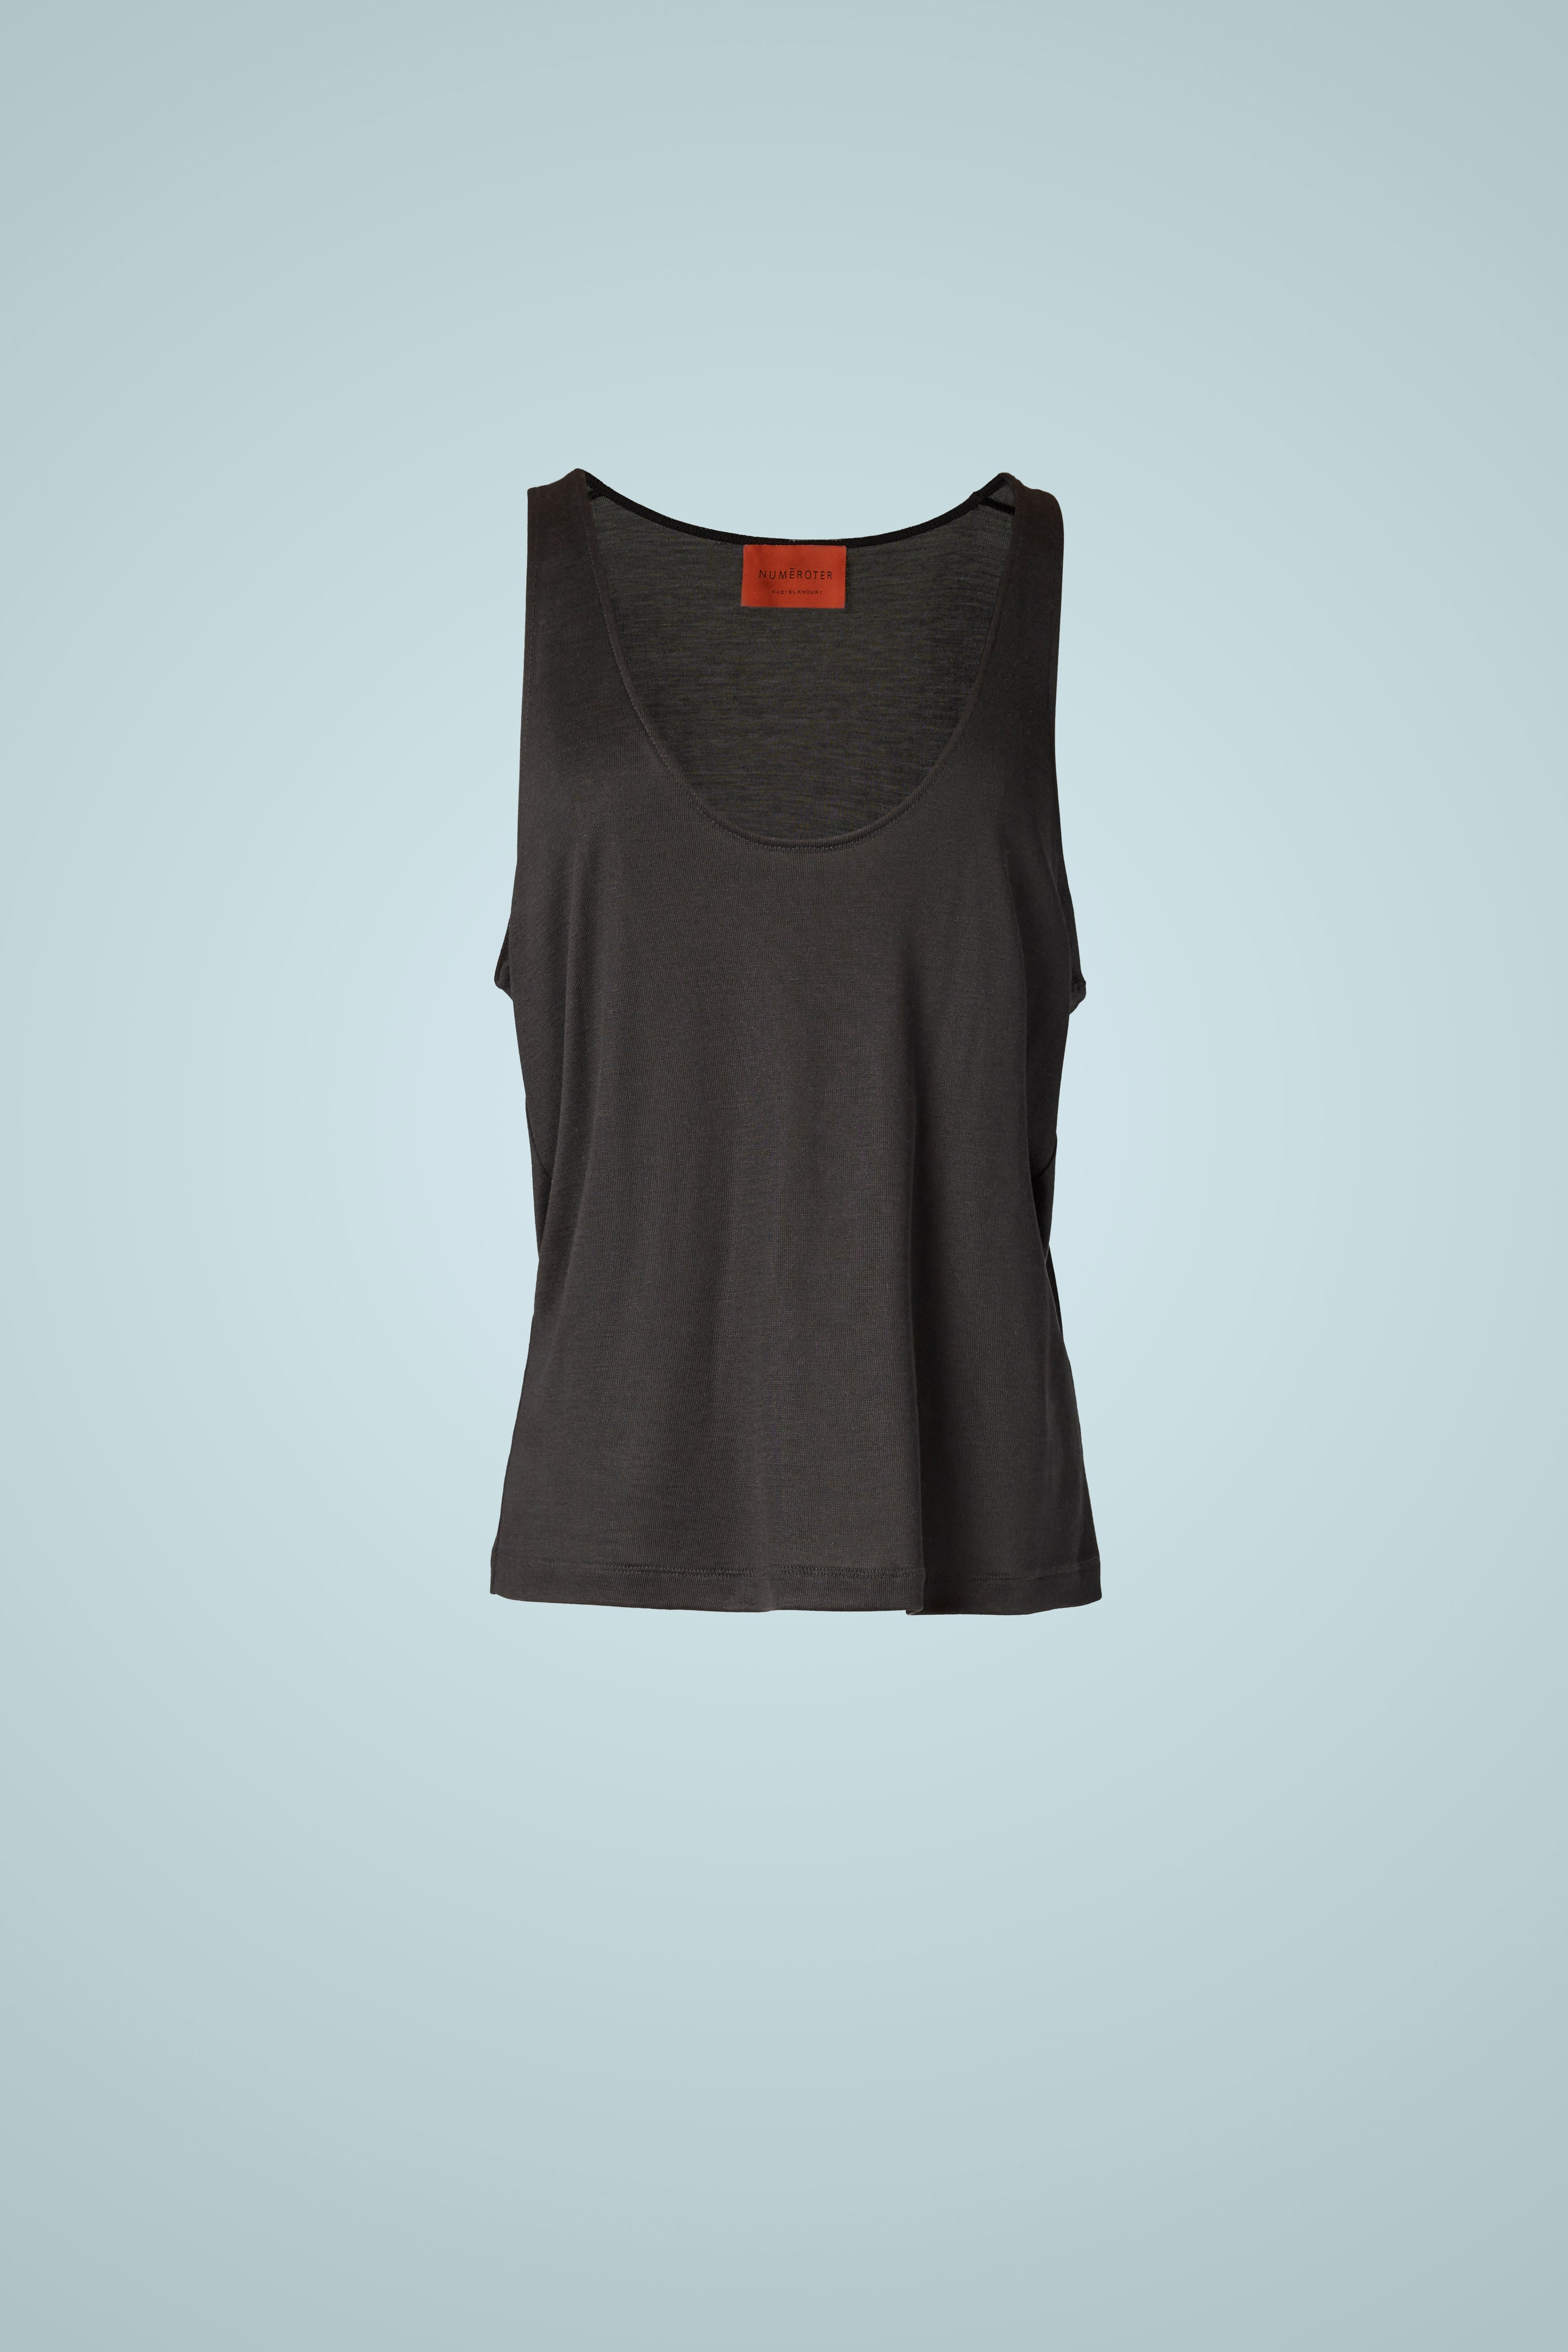 THE MOTION EDIT TANK TOP IN SILK JERSEY